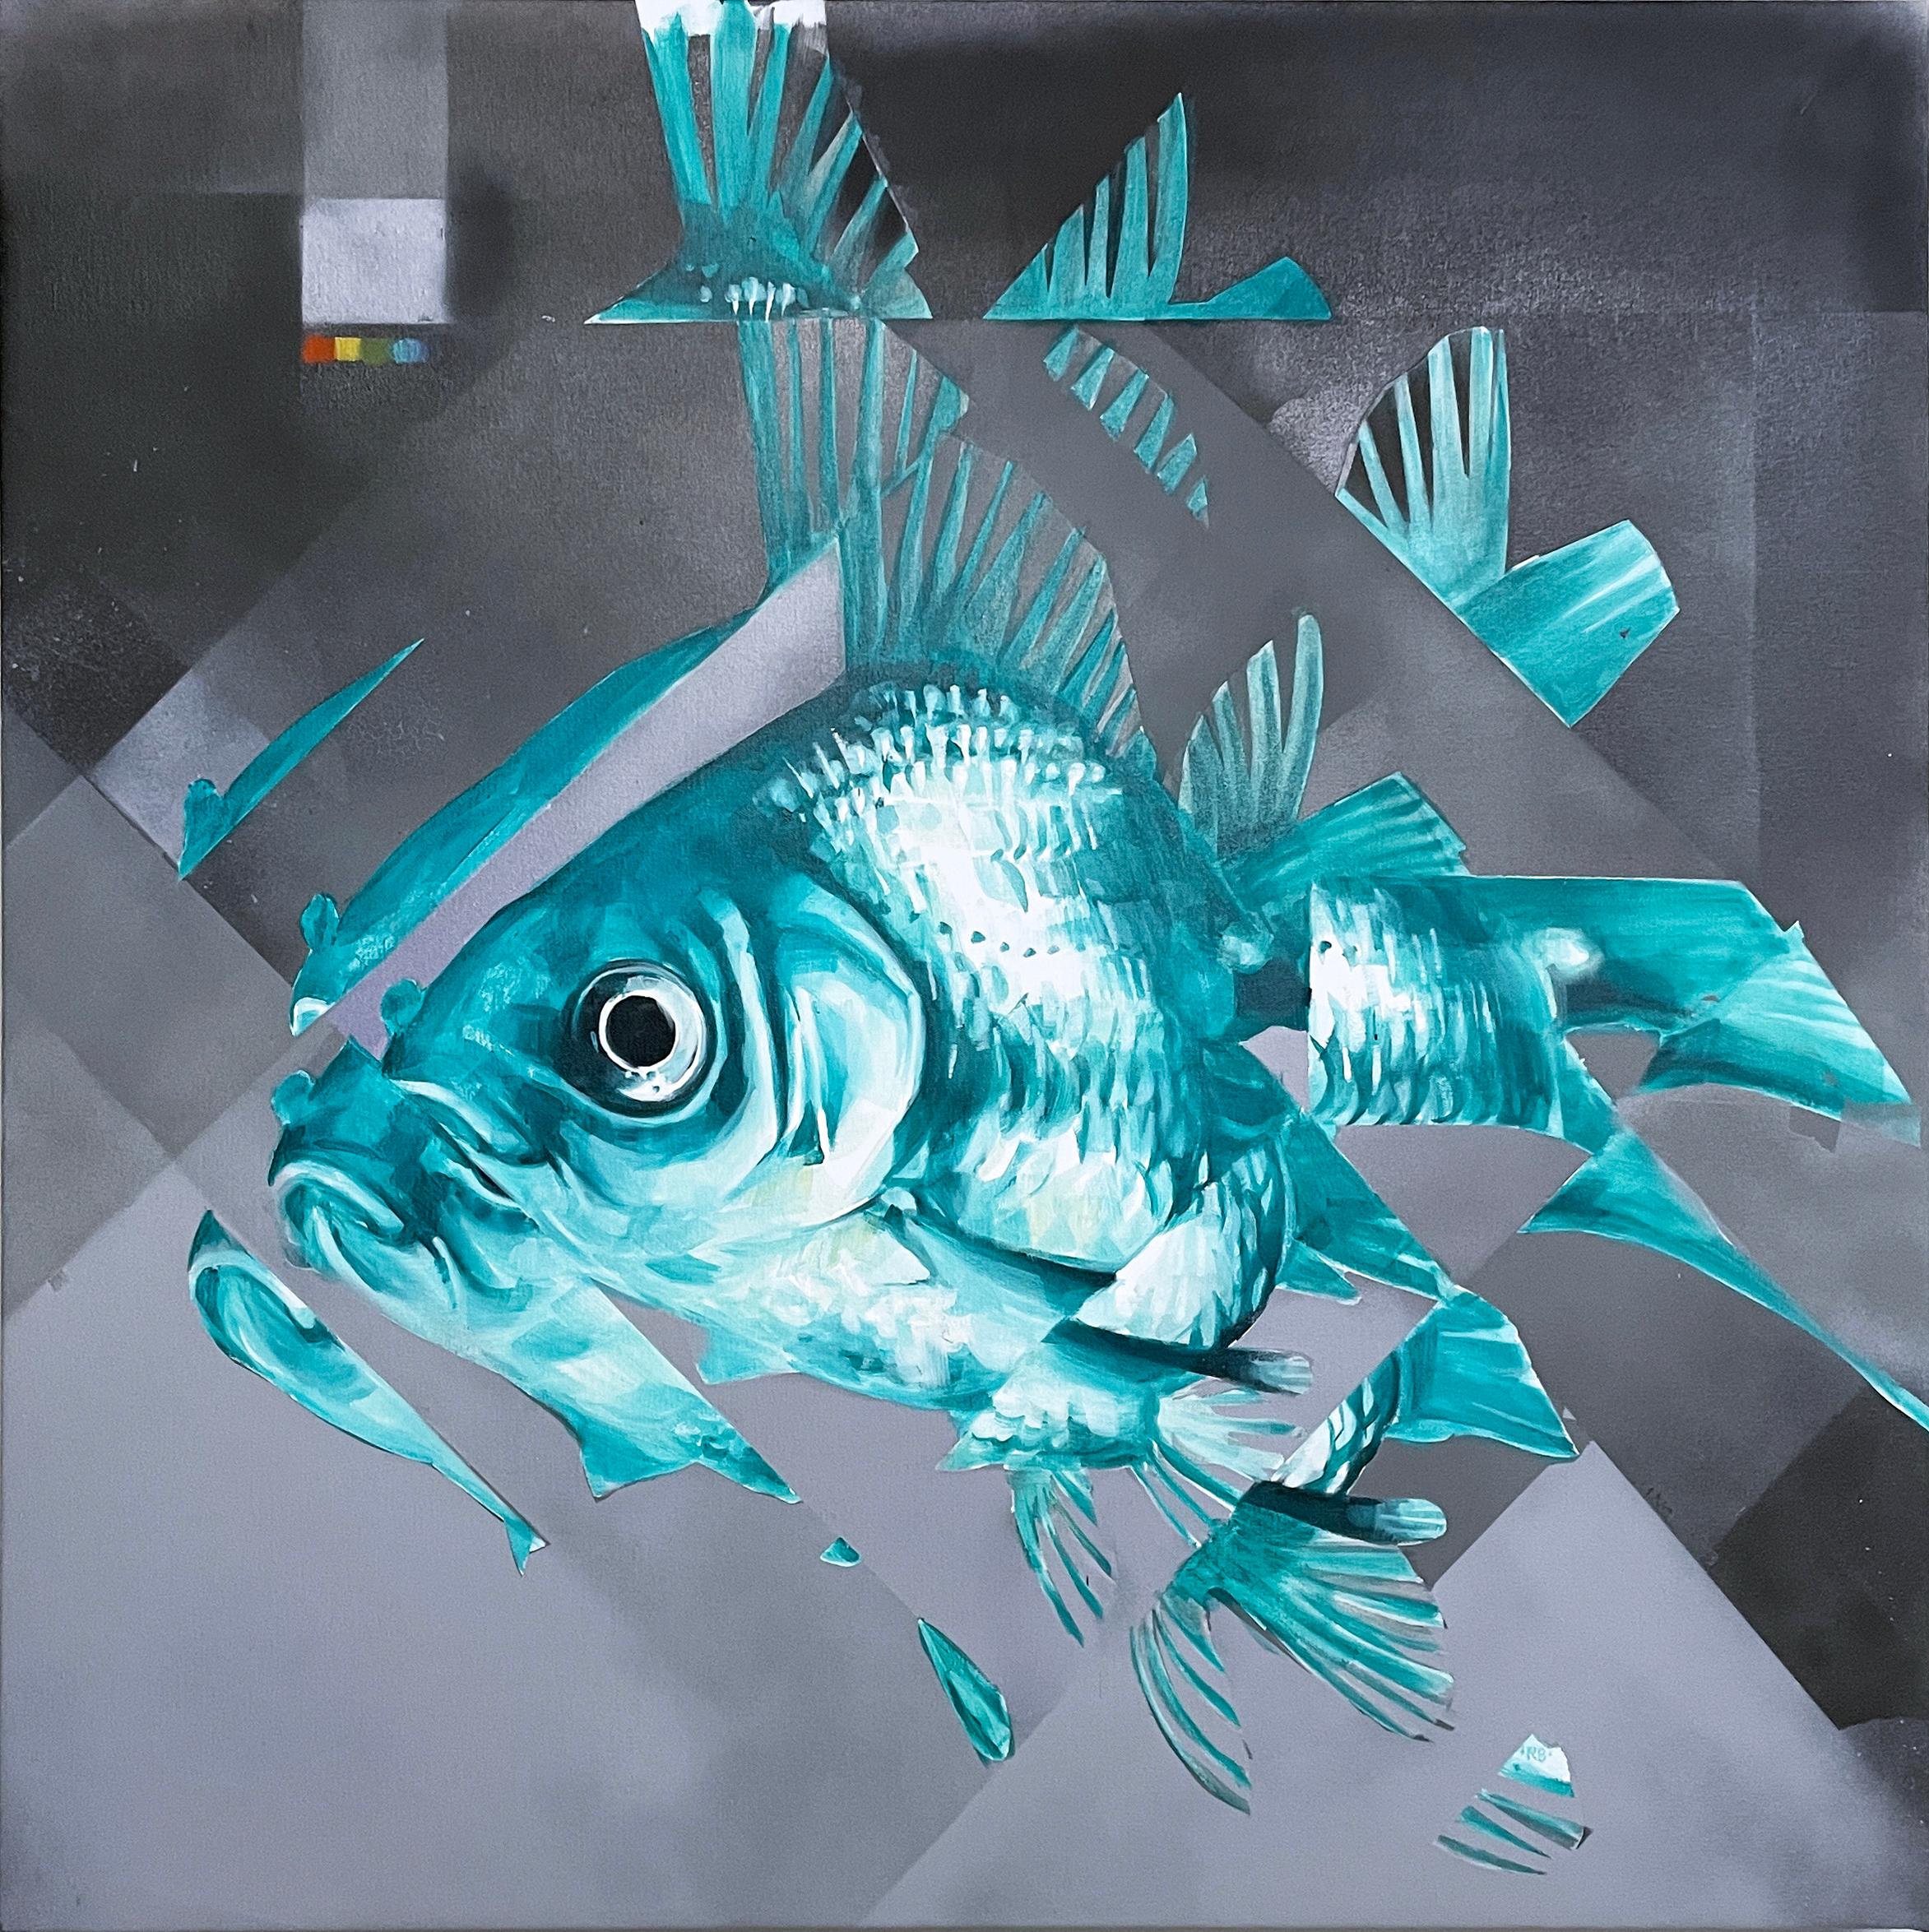 RU8ICON1 Animal Painting - Big Fish (2022) oil on canvas, figurative, gray, blue, pixels, water, goldfish